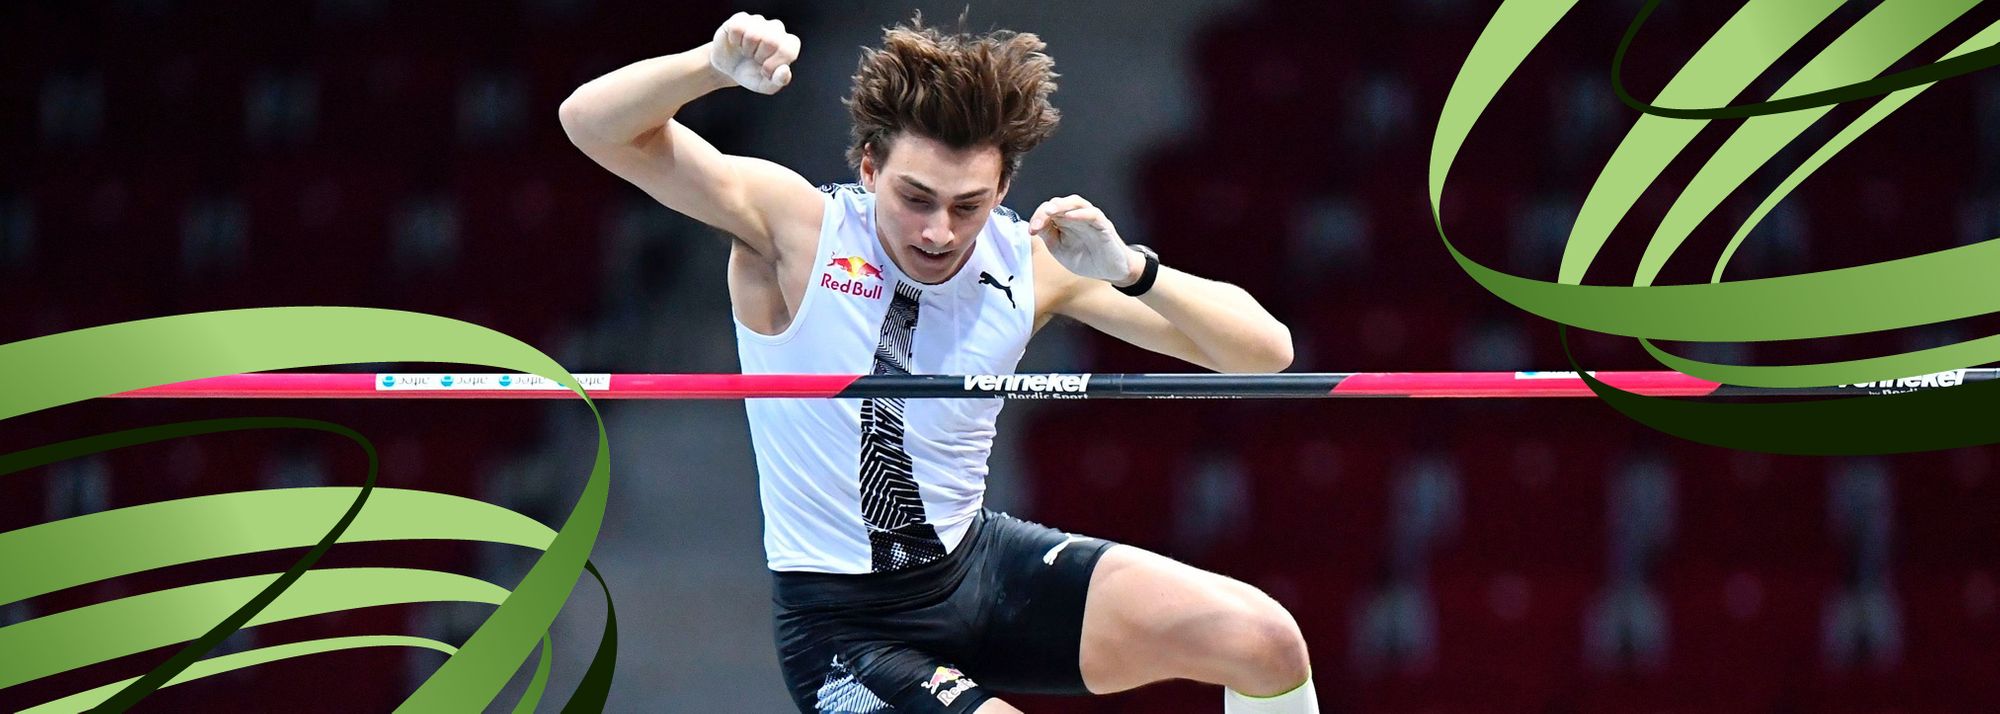 Preview of the INIT Indoor Meeting Karlsruhe, which is set to star Mondo Duplantis, Berihu Aregawi and Malaika Mihambo